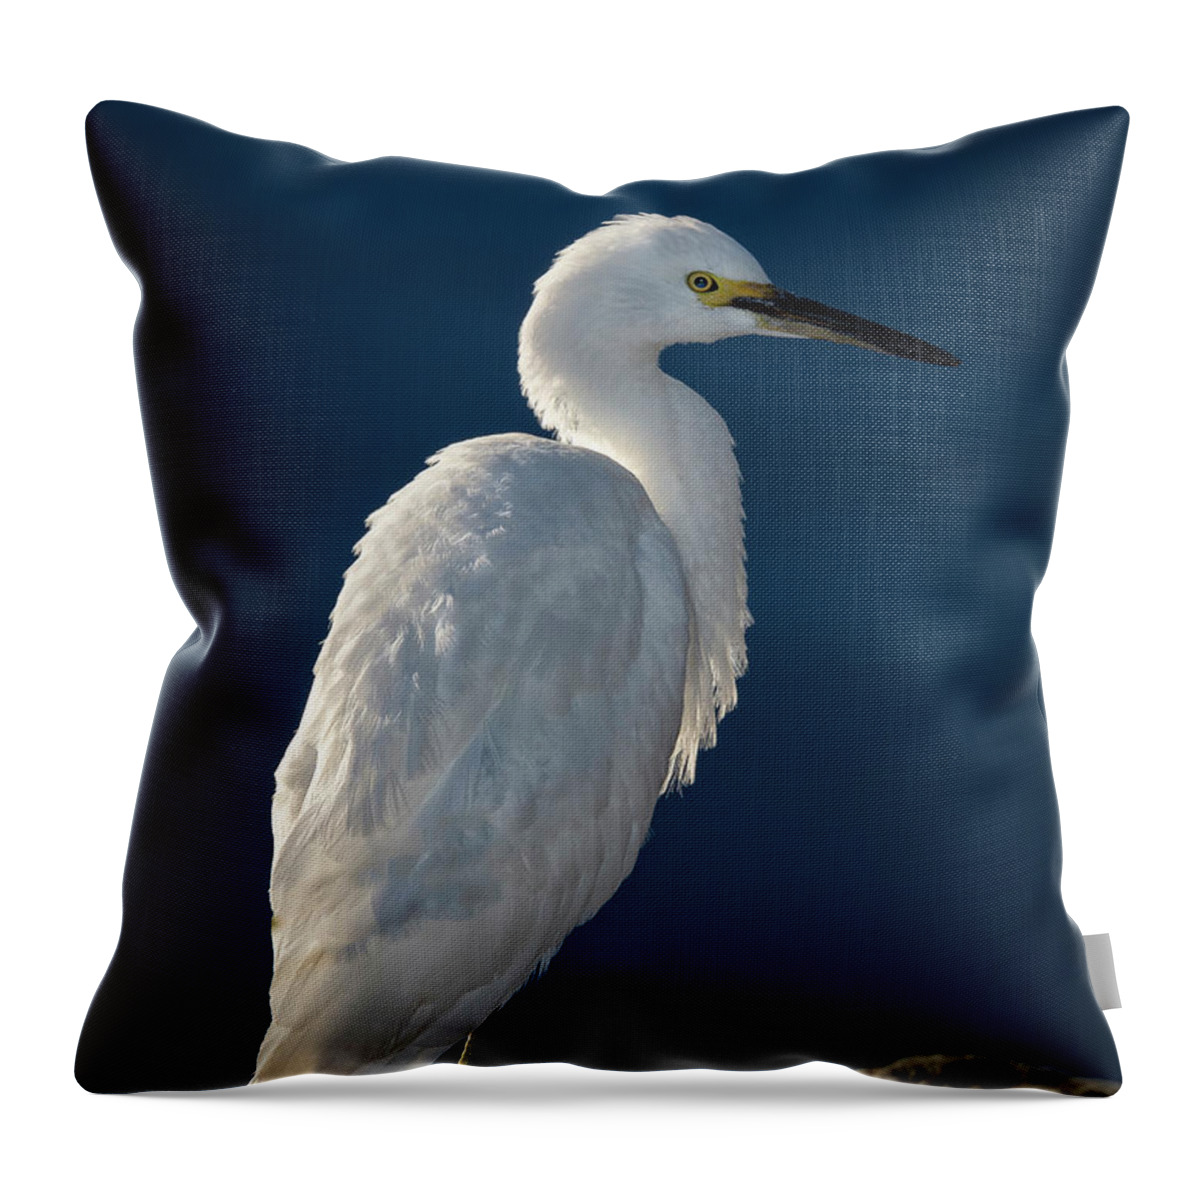 Snowy White Egret Throw Pillow featuring the photograph Snowy White Egret 5 by Rick Mosher